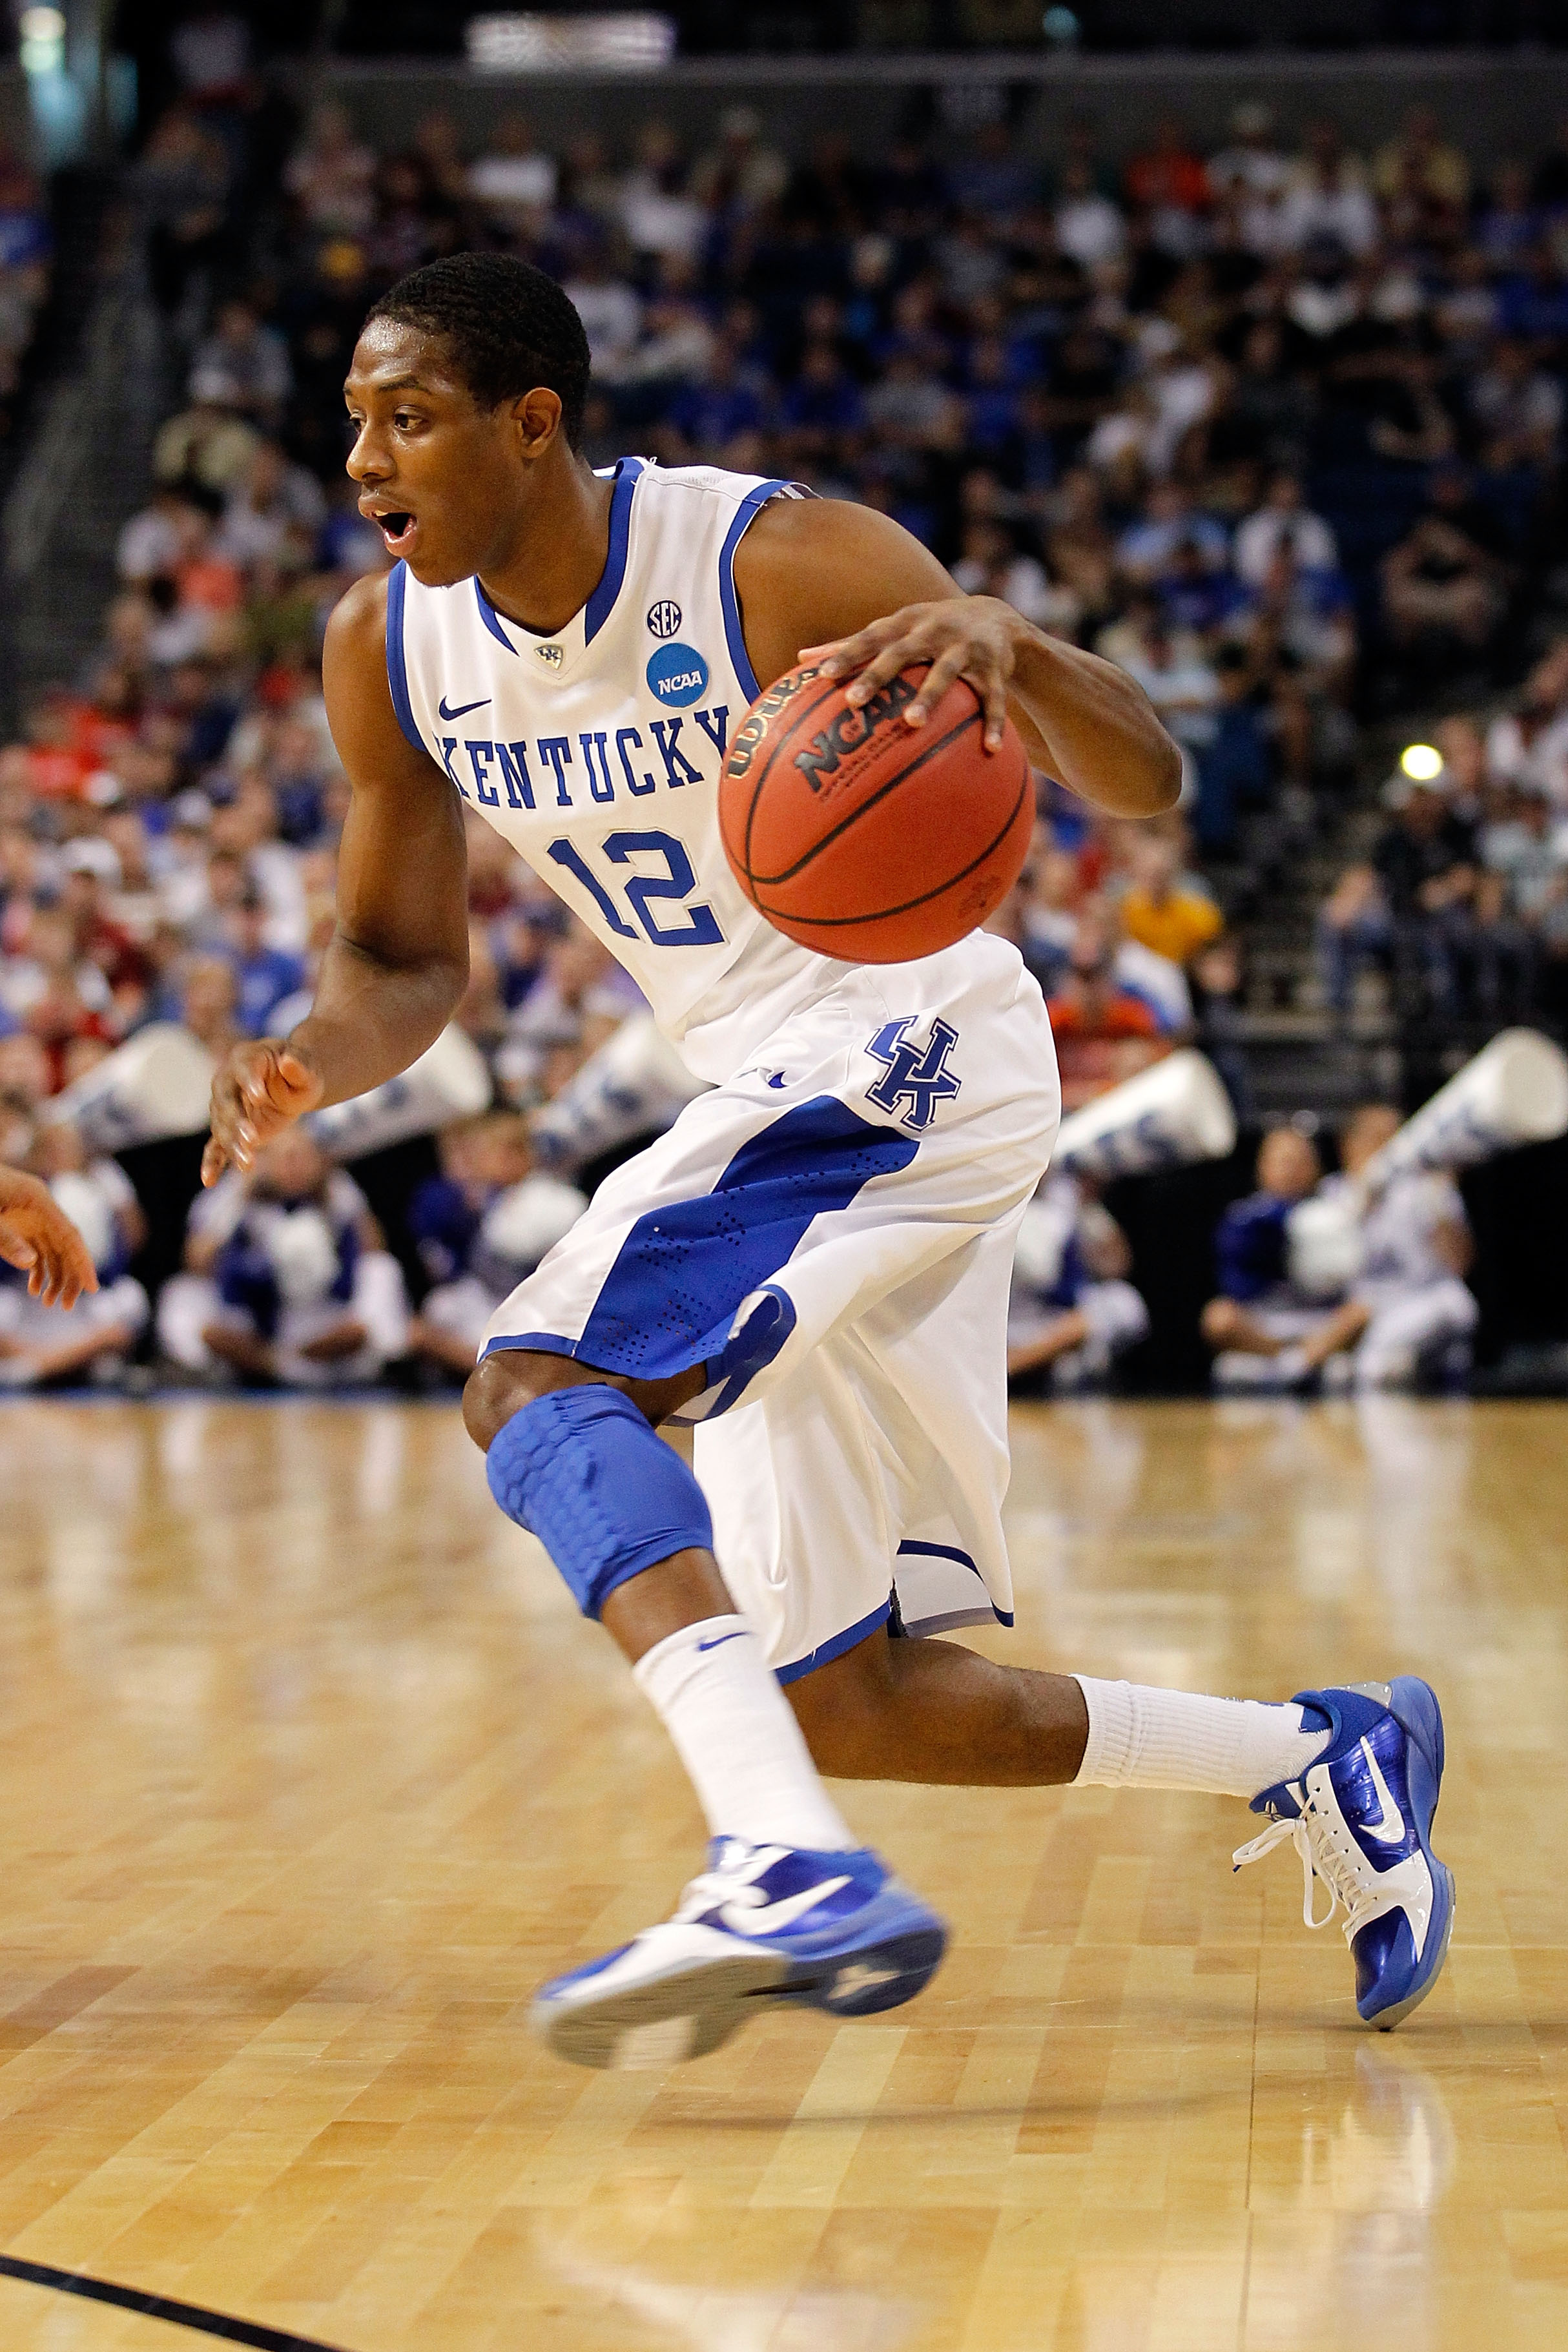 TAMPA, FL - MARCH 19:  Brandon Knight #12 of the Kentucky Wildcats drives against the West Virginia Mountaineers during the third round of the 2011 NCAA men's basketball tournament at St. Pete Times Forum on March 19, 2011 in Tampa, Florida.  (Photo by J.